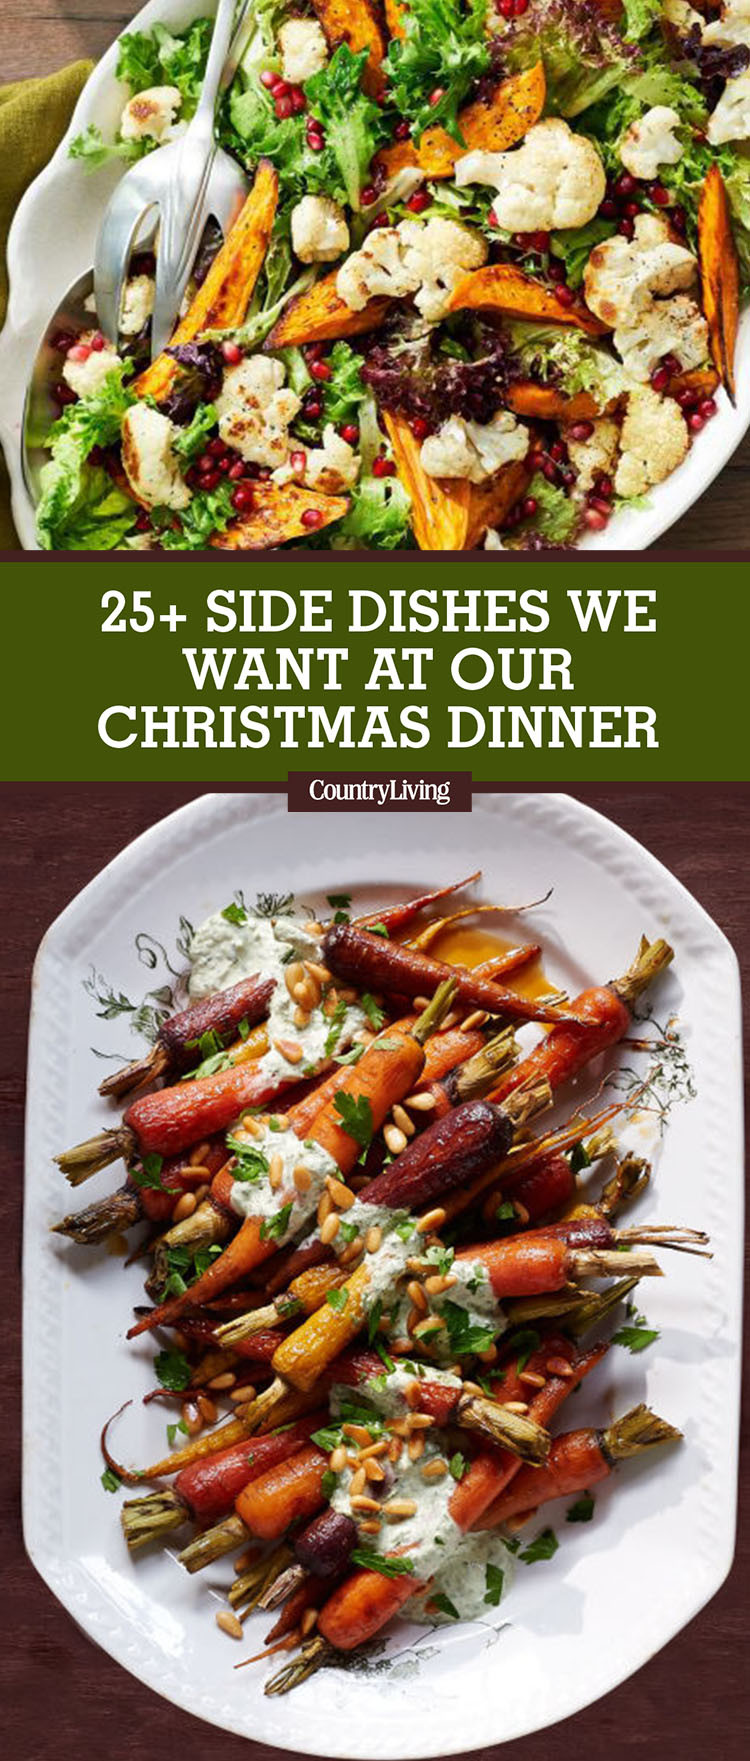 Christmas Side Dishes Recipes
 30 Easy Christmas Side Dishes Best Recipes for Holiday